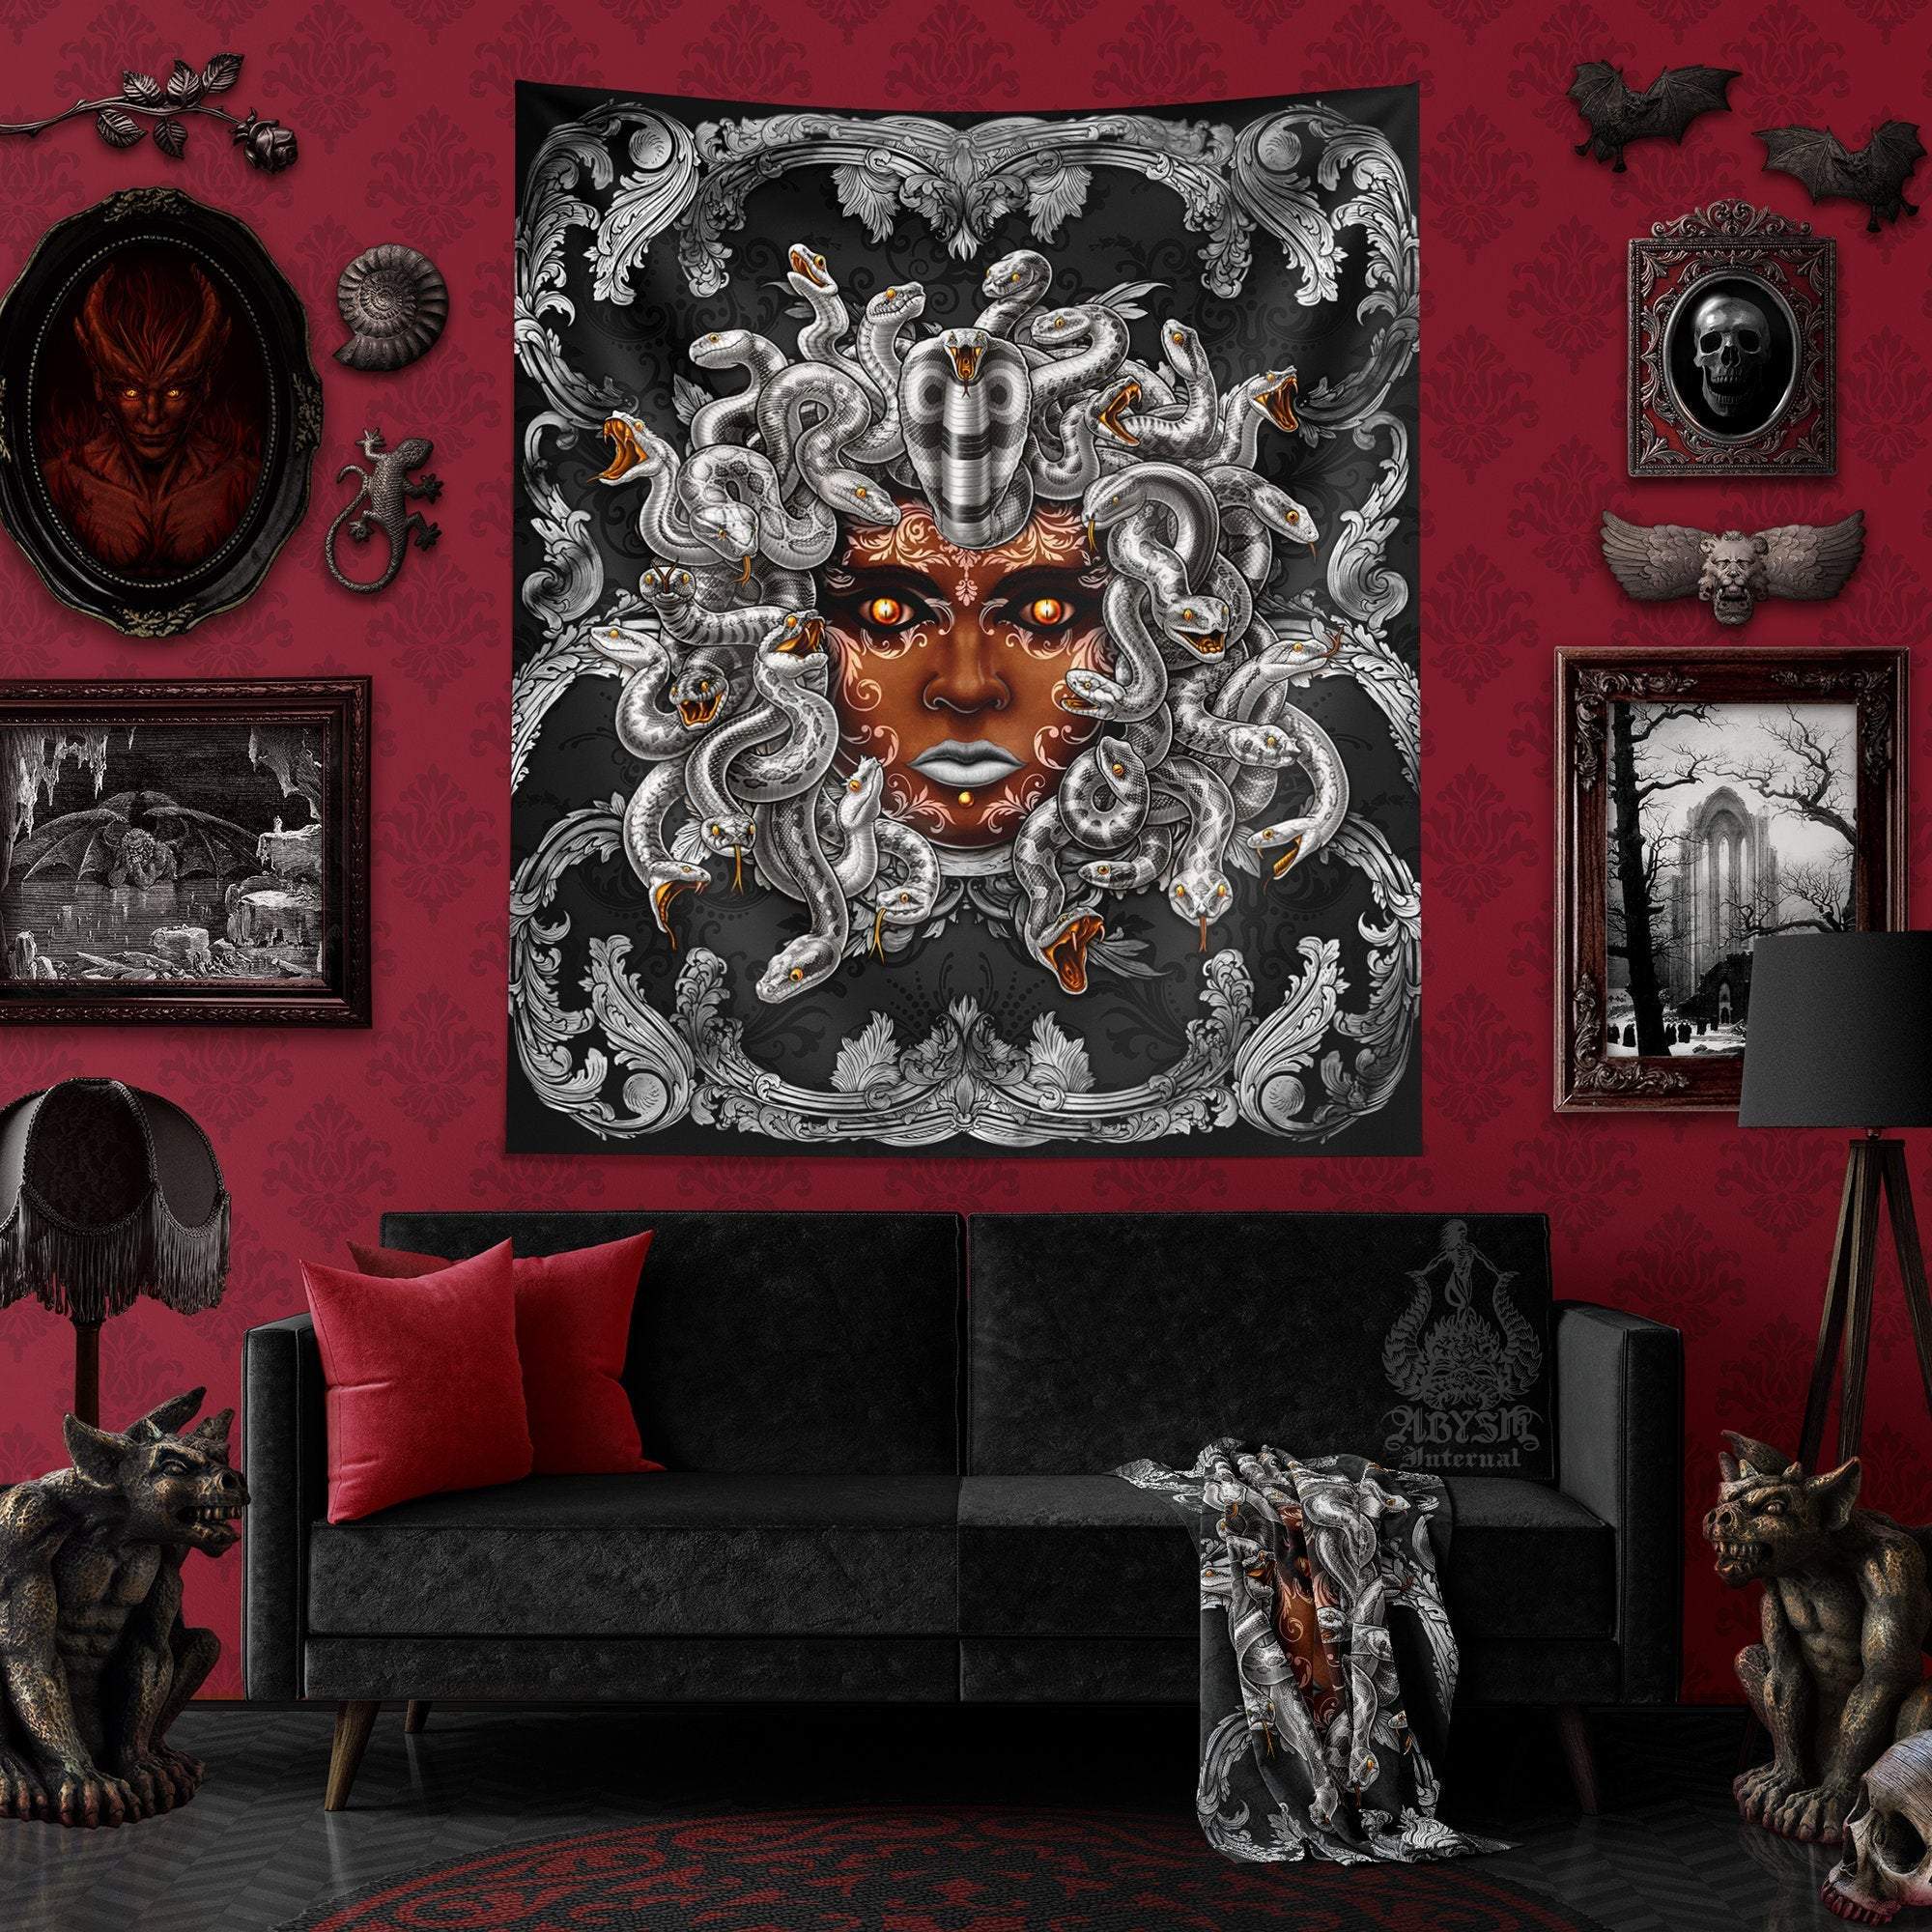 Medusa Tapestry, Baroque Wall Hanging, Goth Home Decor, Art Print - Silver Snakes - Abysm Internal